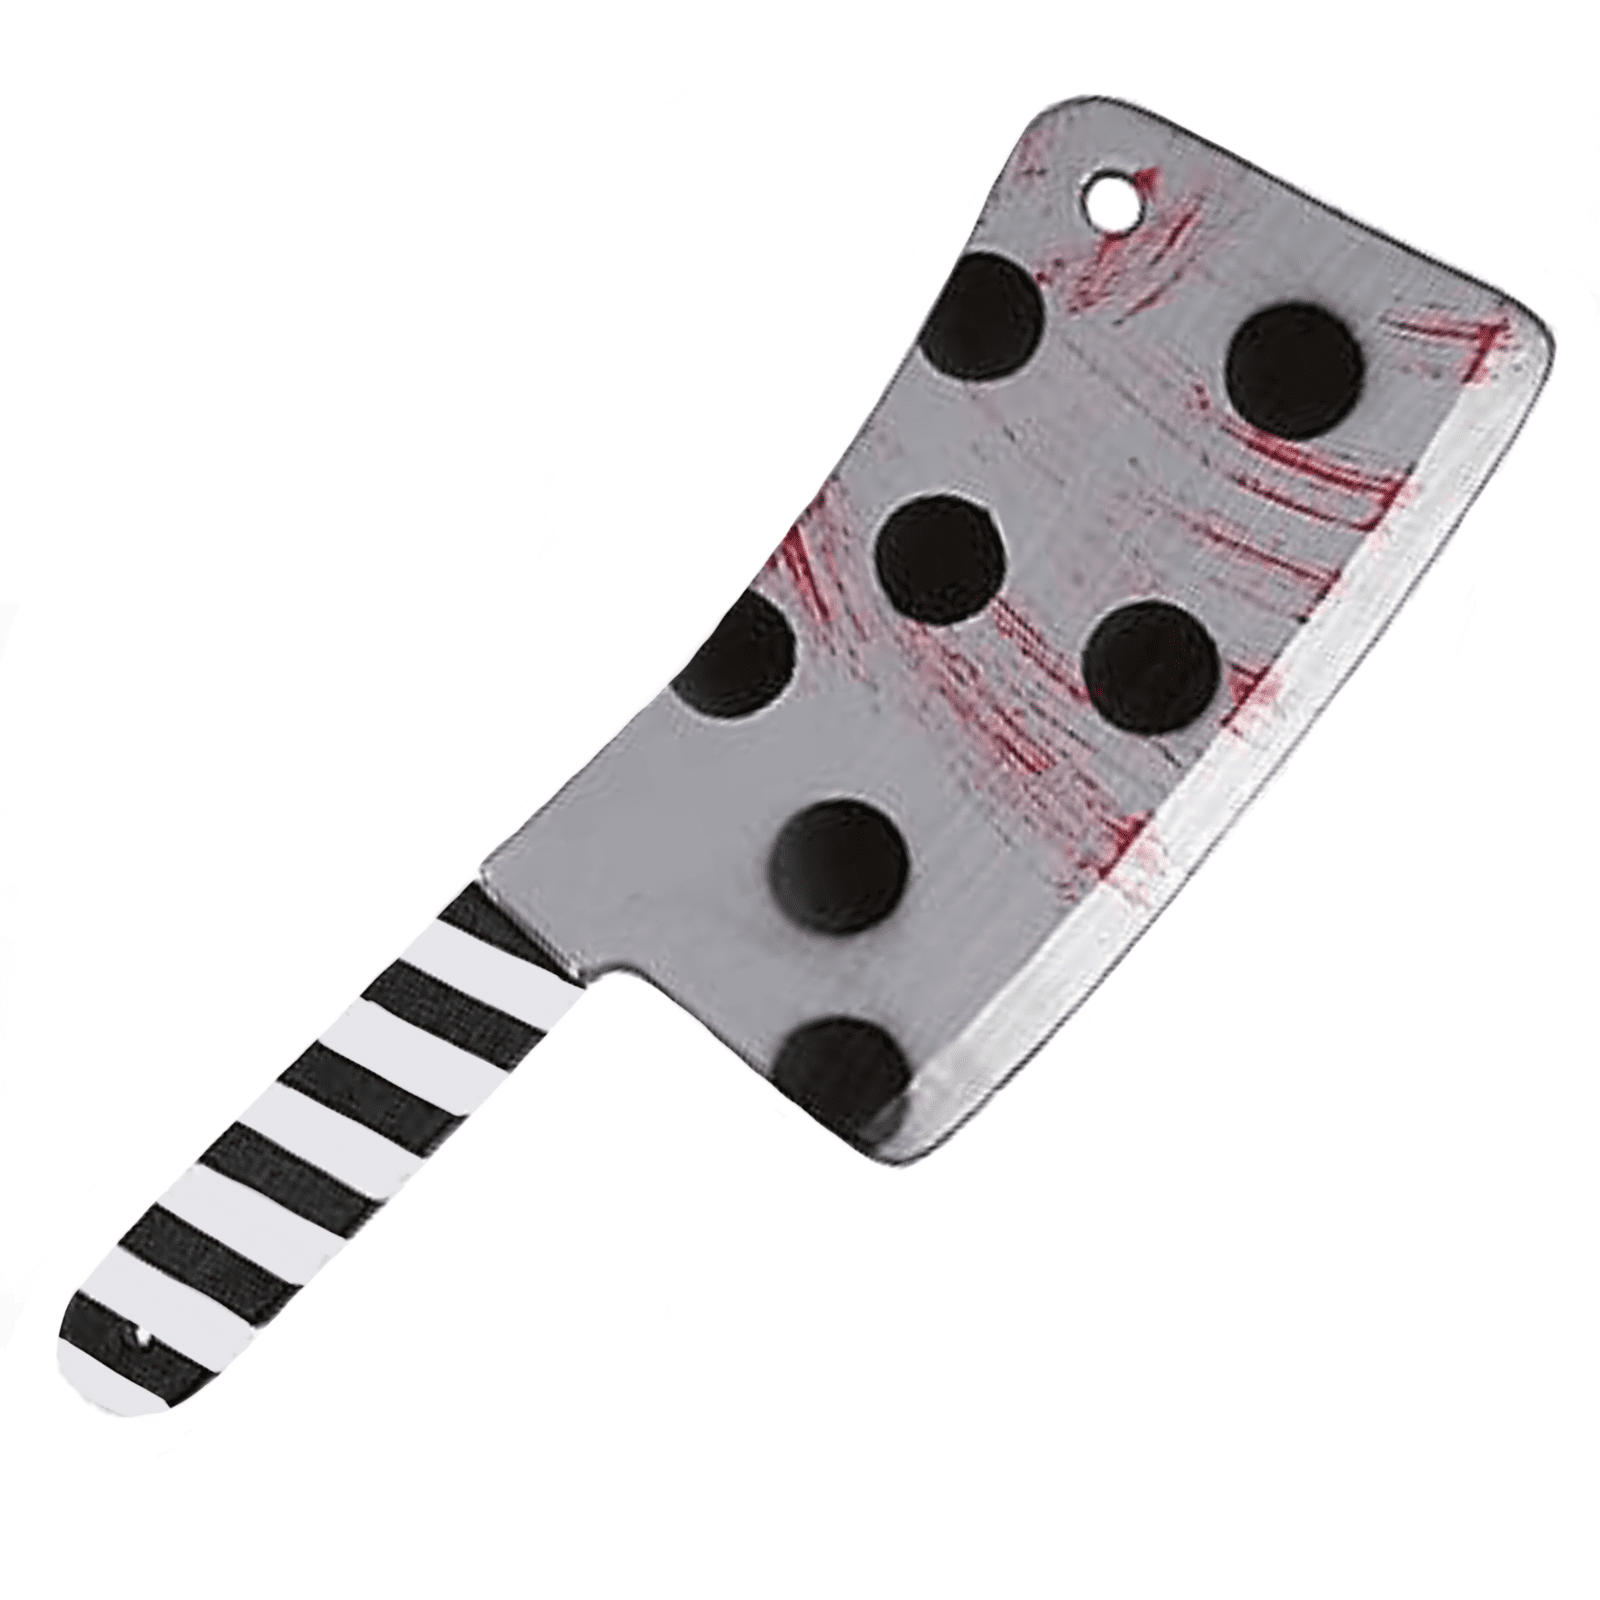 Featured image for “Creepy Clown Cleaver”